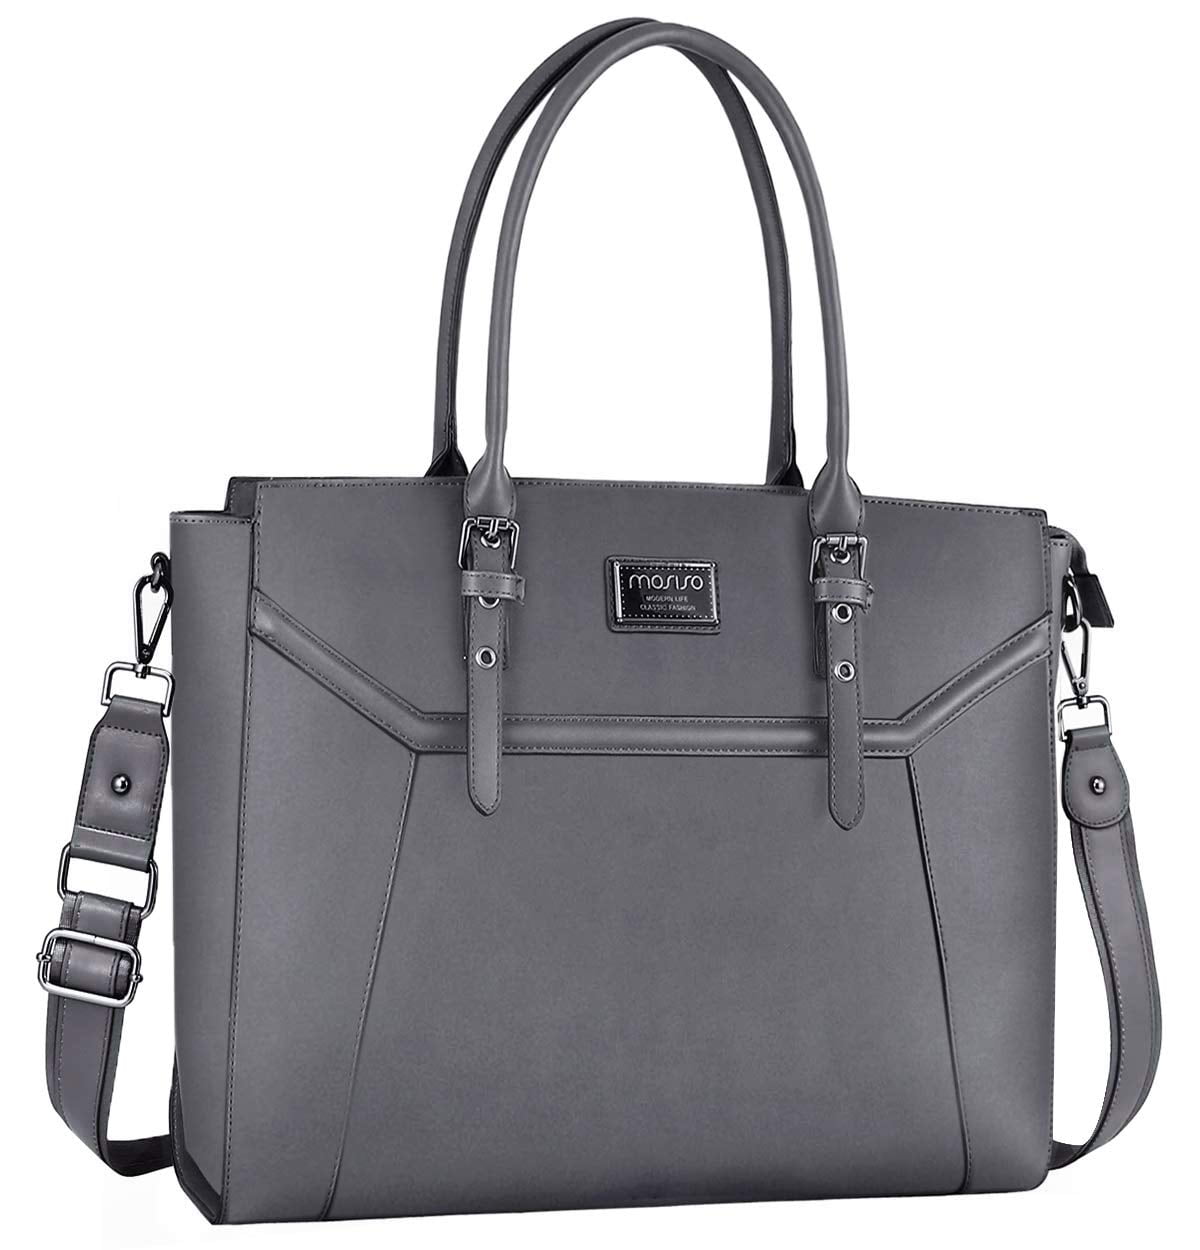 ,Premium PU Leather Business Work Travel Shoulder Handbag with Thick Shockproof Compartment&Adjustable Top Handle Compatible MacBook&Notebook,Gray Up to 17.3 Inch MOSISO Laptop Tote Bag for Women 